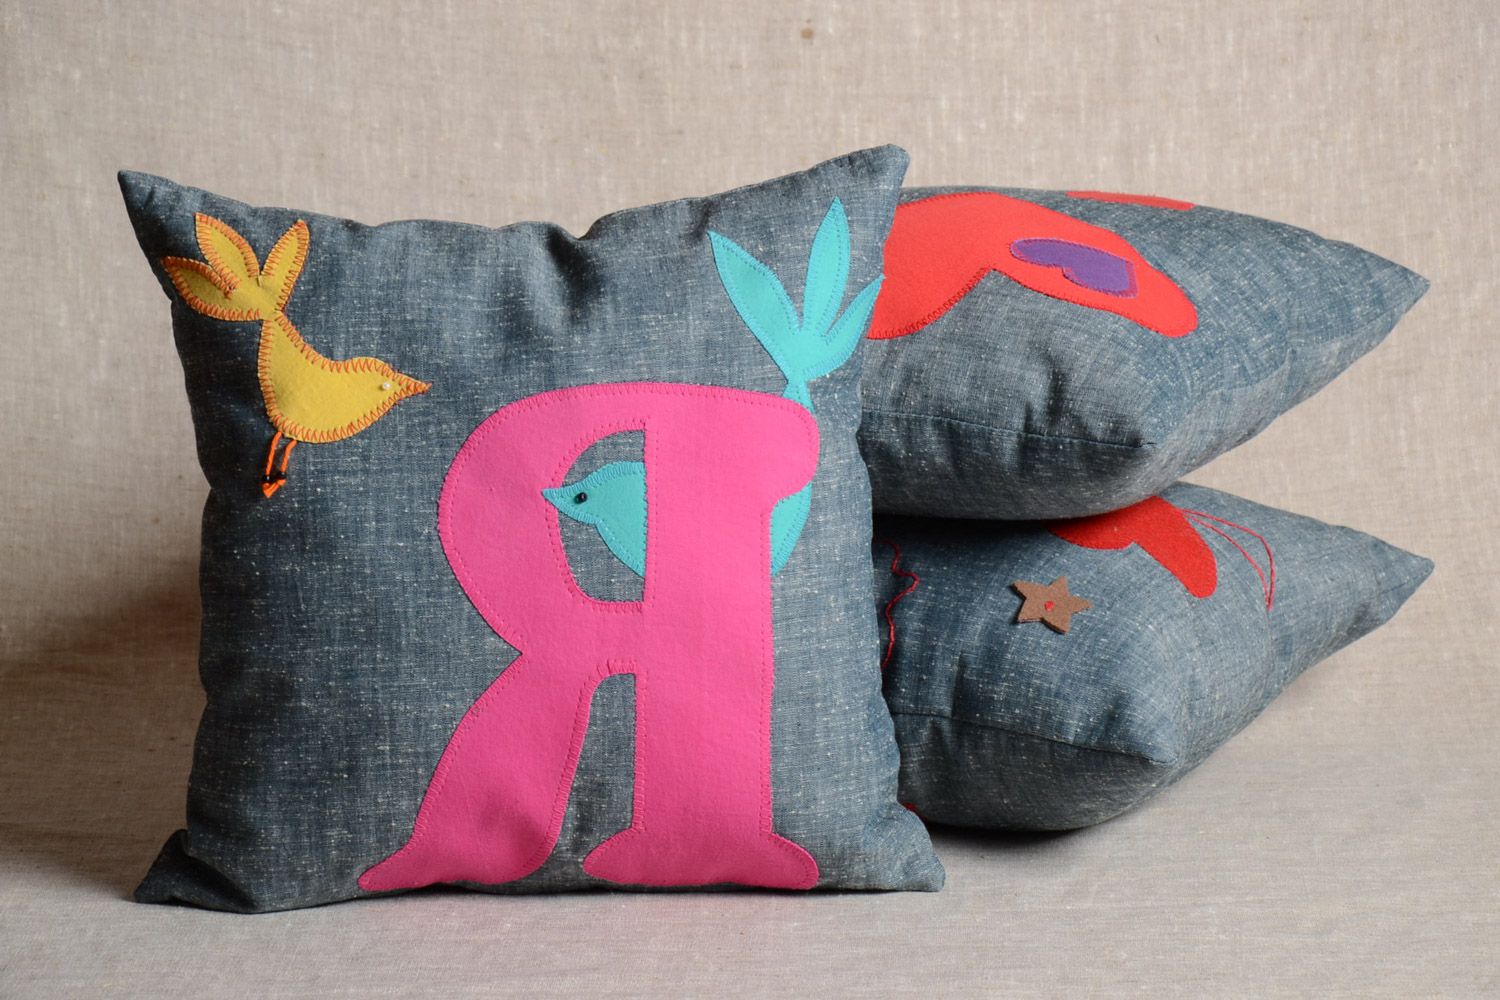 Handmade designer fabric cushion with removable pillowcase decorated with letter applique photo 1